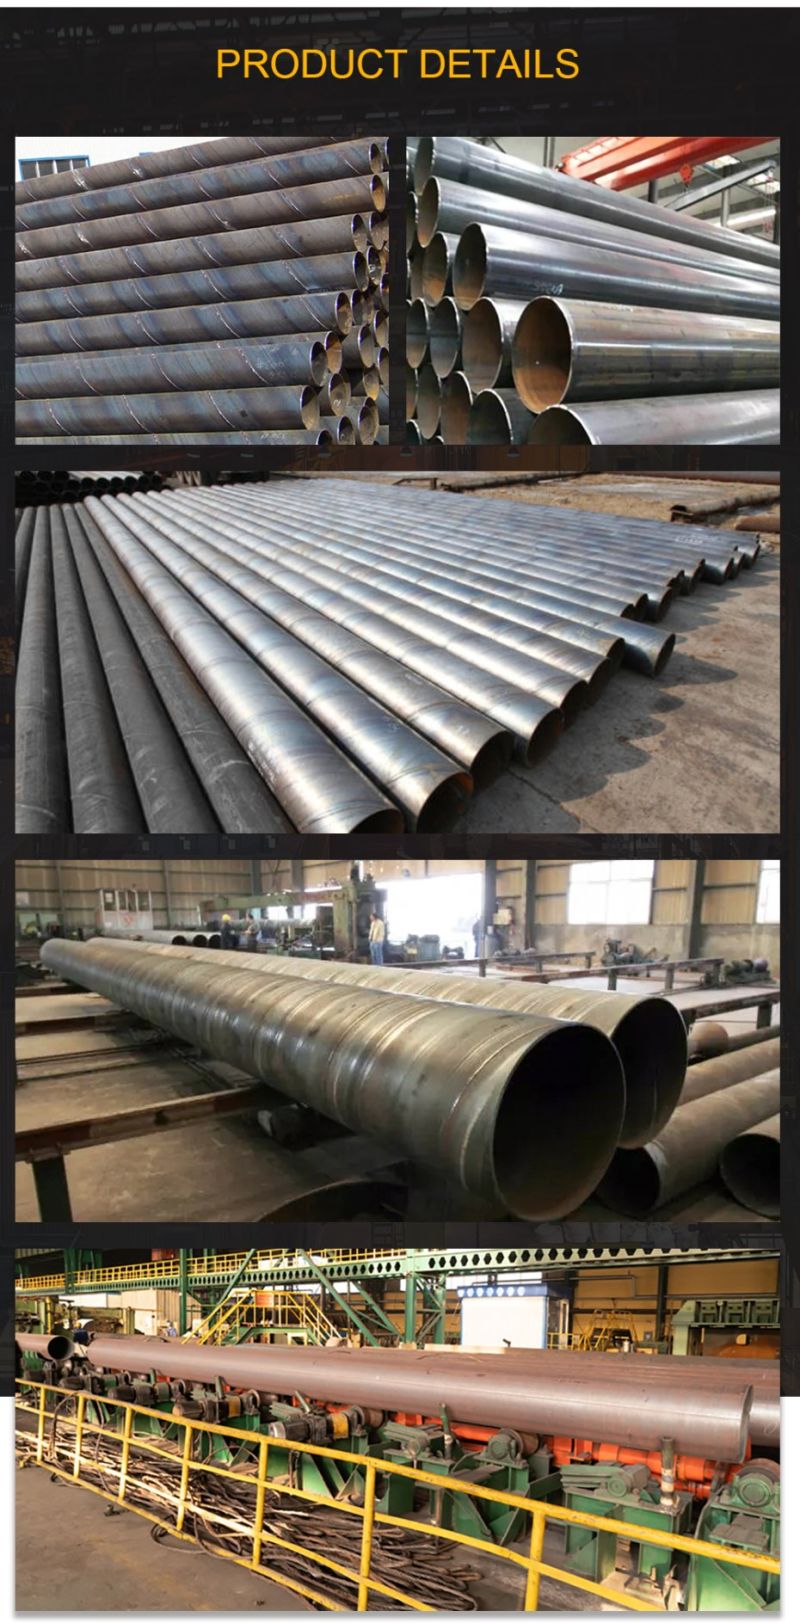 Square Carbon Steel Welded Pipes Manufacturer Carbon Steel Tube